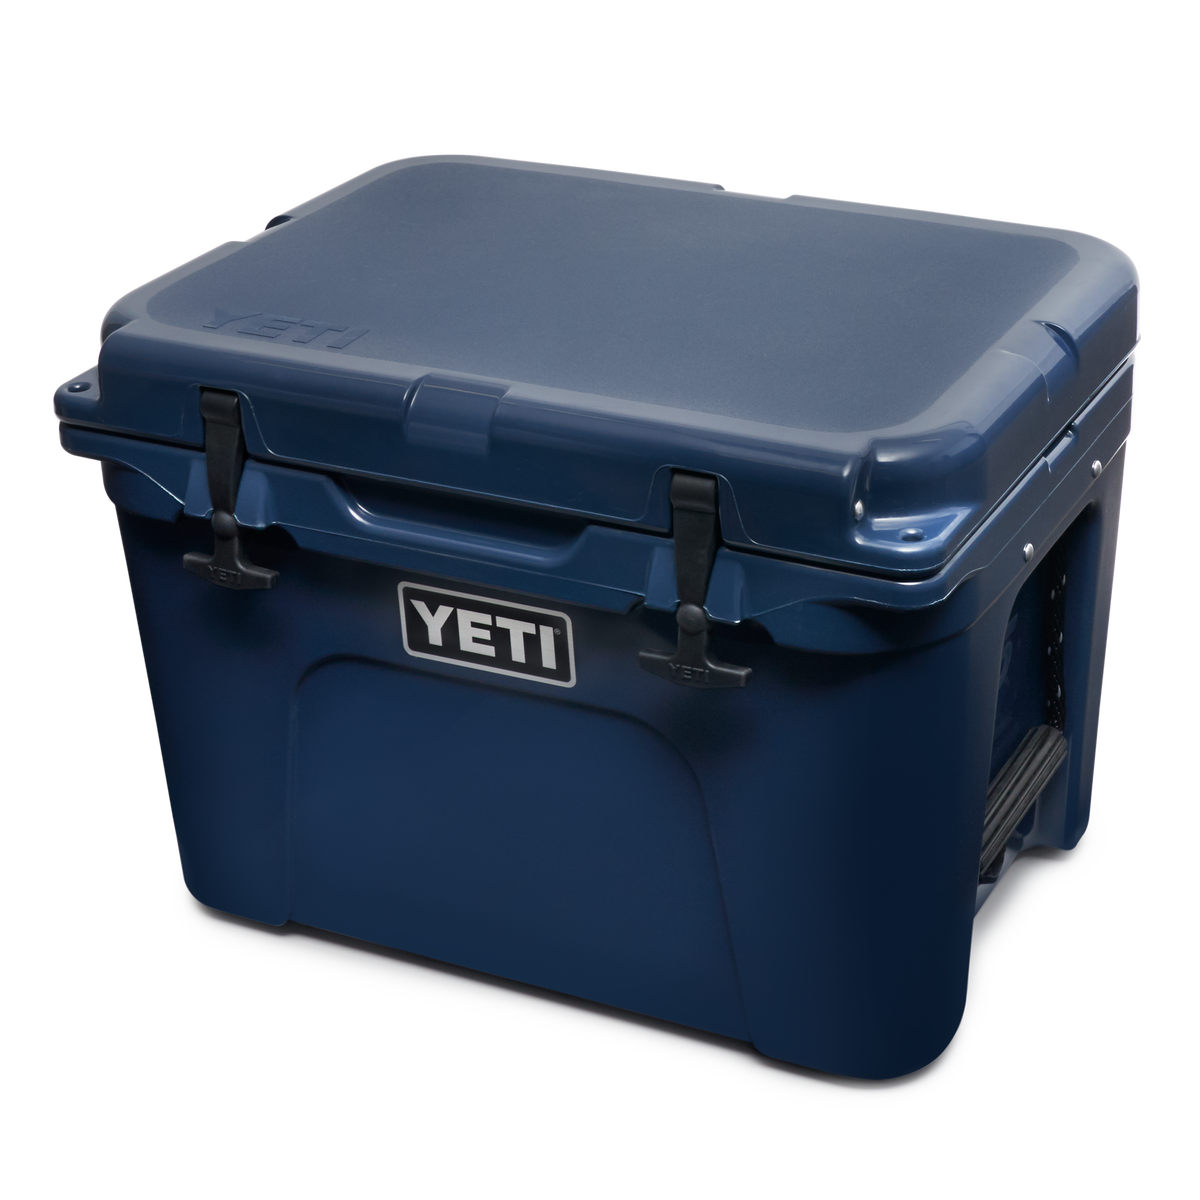 Hy's Toggery - New from YETI. Limited Edition color Coral available in  Tundra coolers 20, 35, and 45. Also the Rambler family in White, Sky Blue,  and Limited Edition Coral. #yeti #rambler #